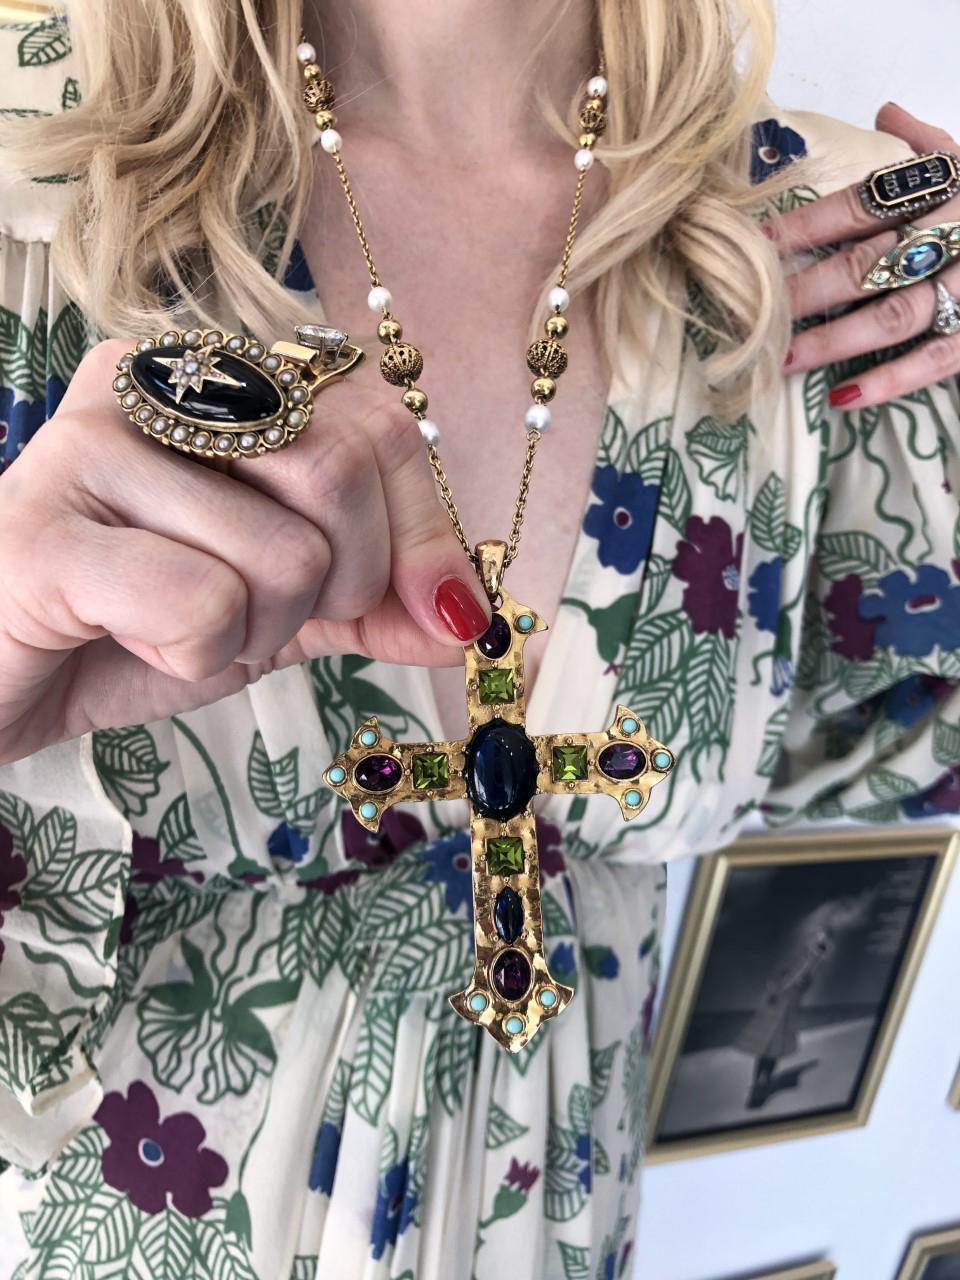 There is nothing like a vintage Christian Dior necklace that illustrates the company’s uncompromising style and sense of design. This beautiful pendant, dating back to their 1972 collection, is a great example of the design ingenuity combining